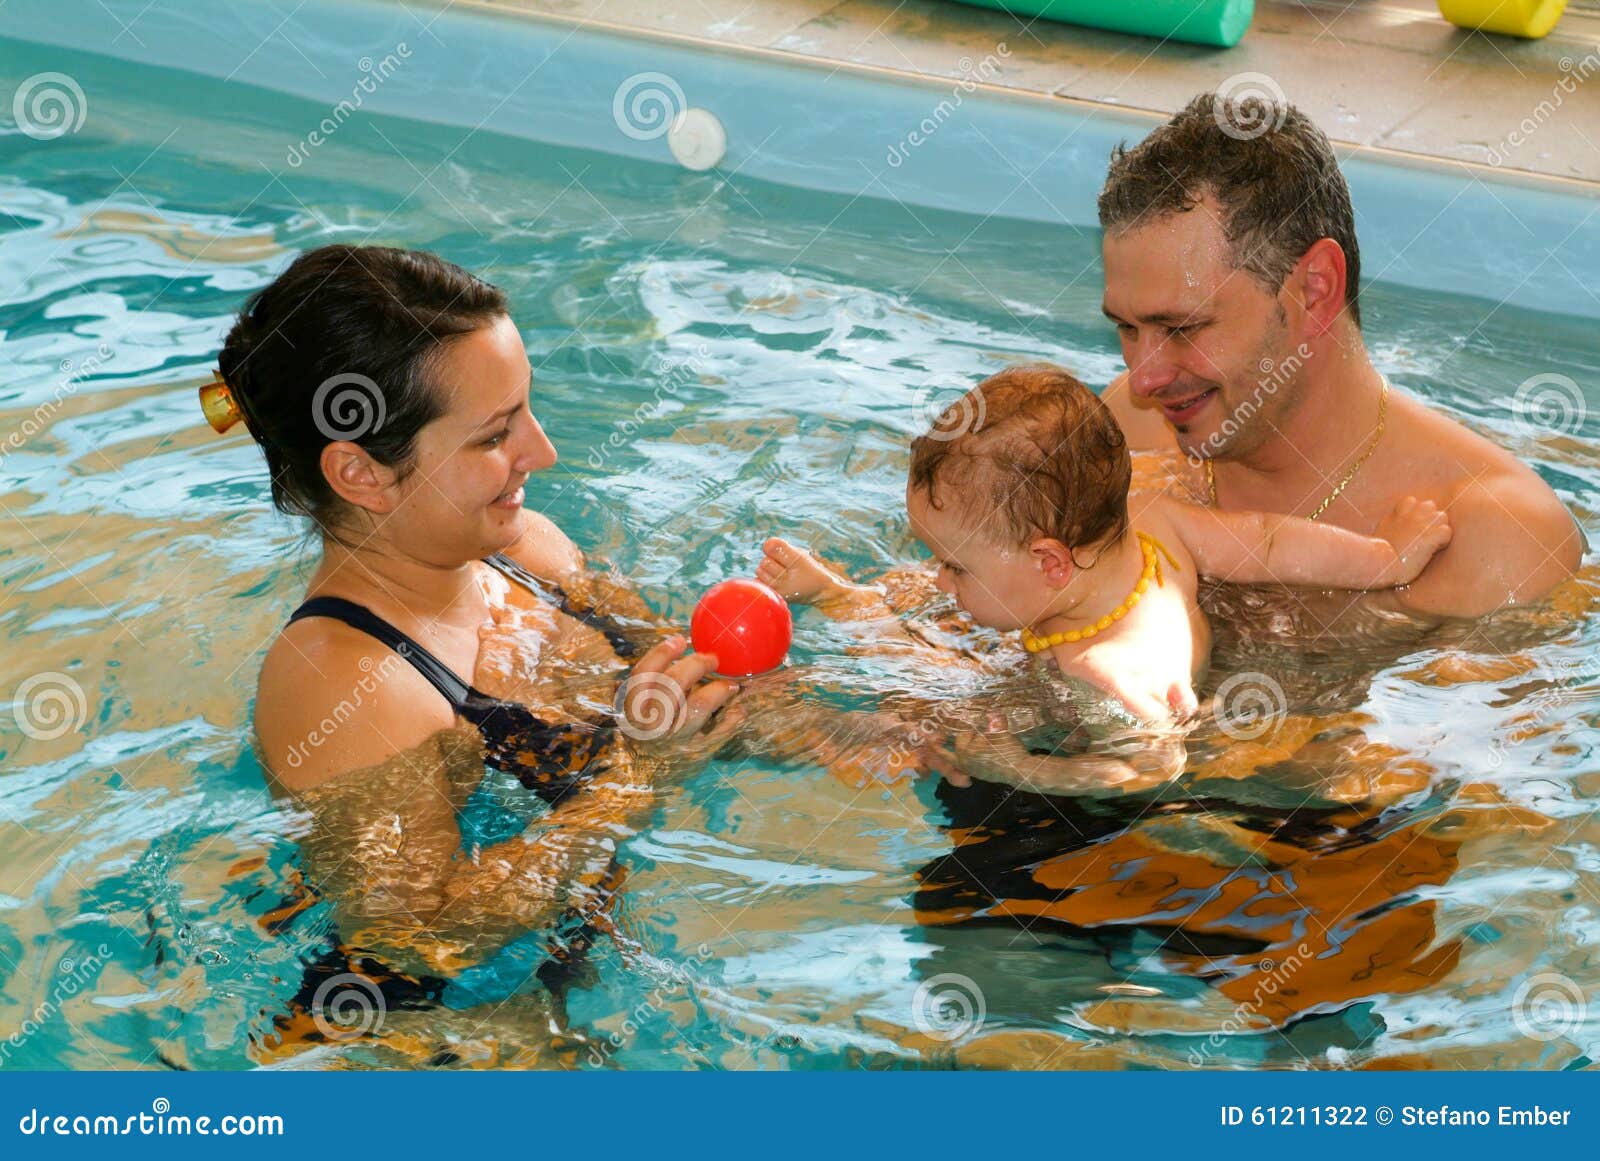 Adorable Baby Enjoying Swimming In A Pool With His Mother Editorial